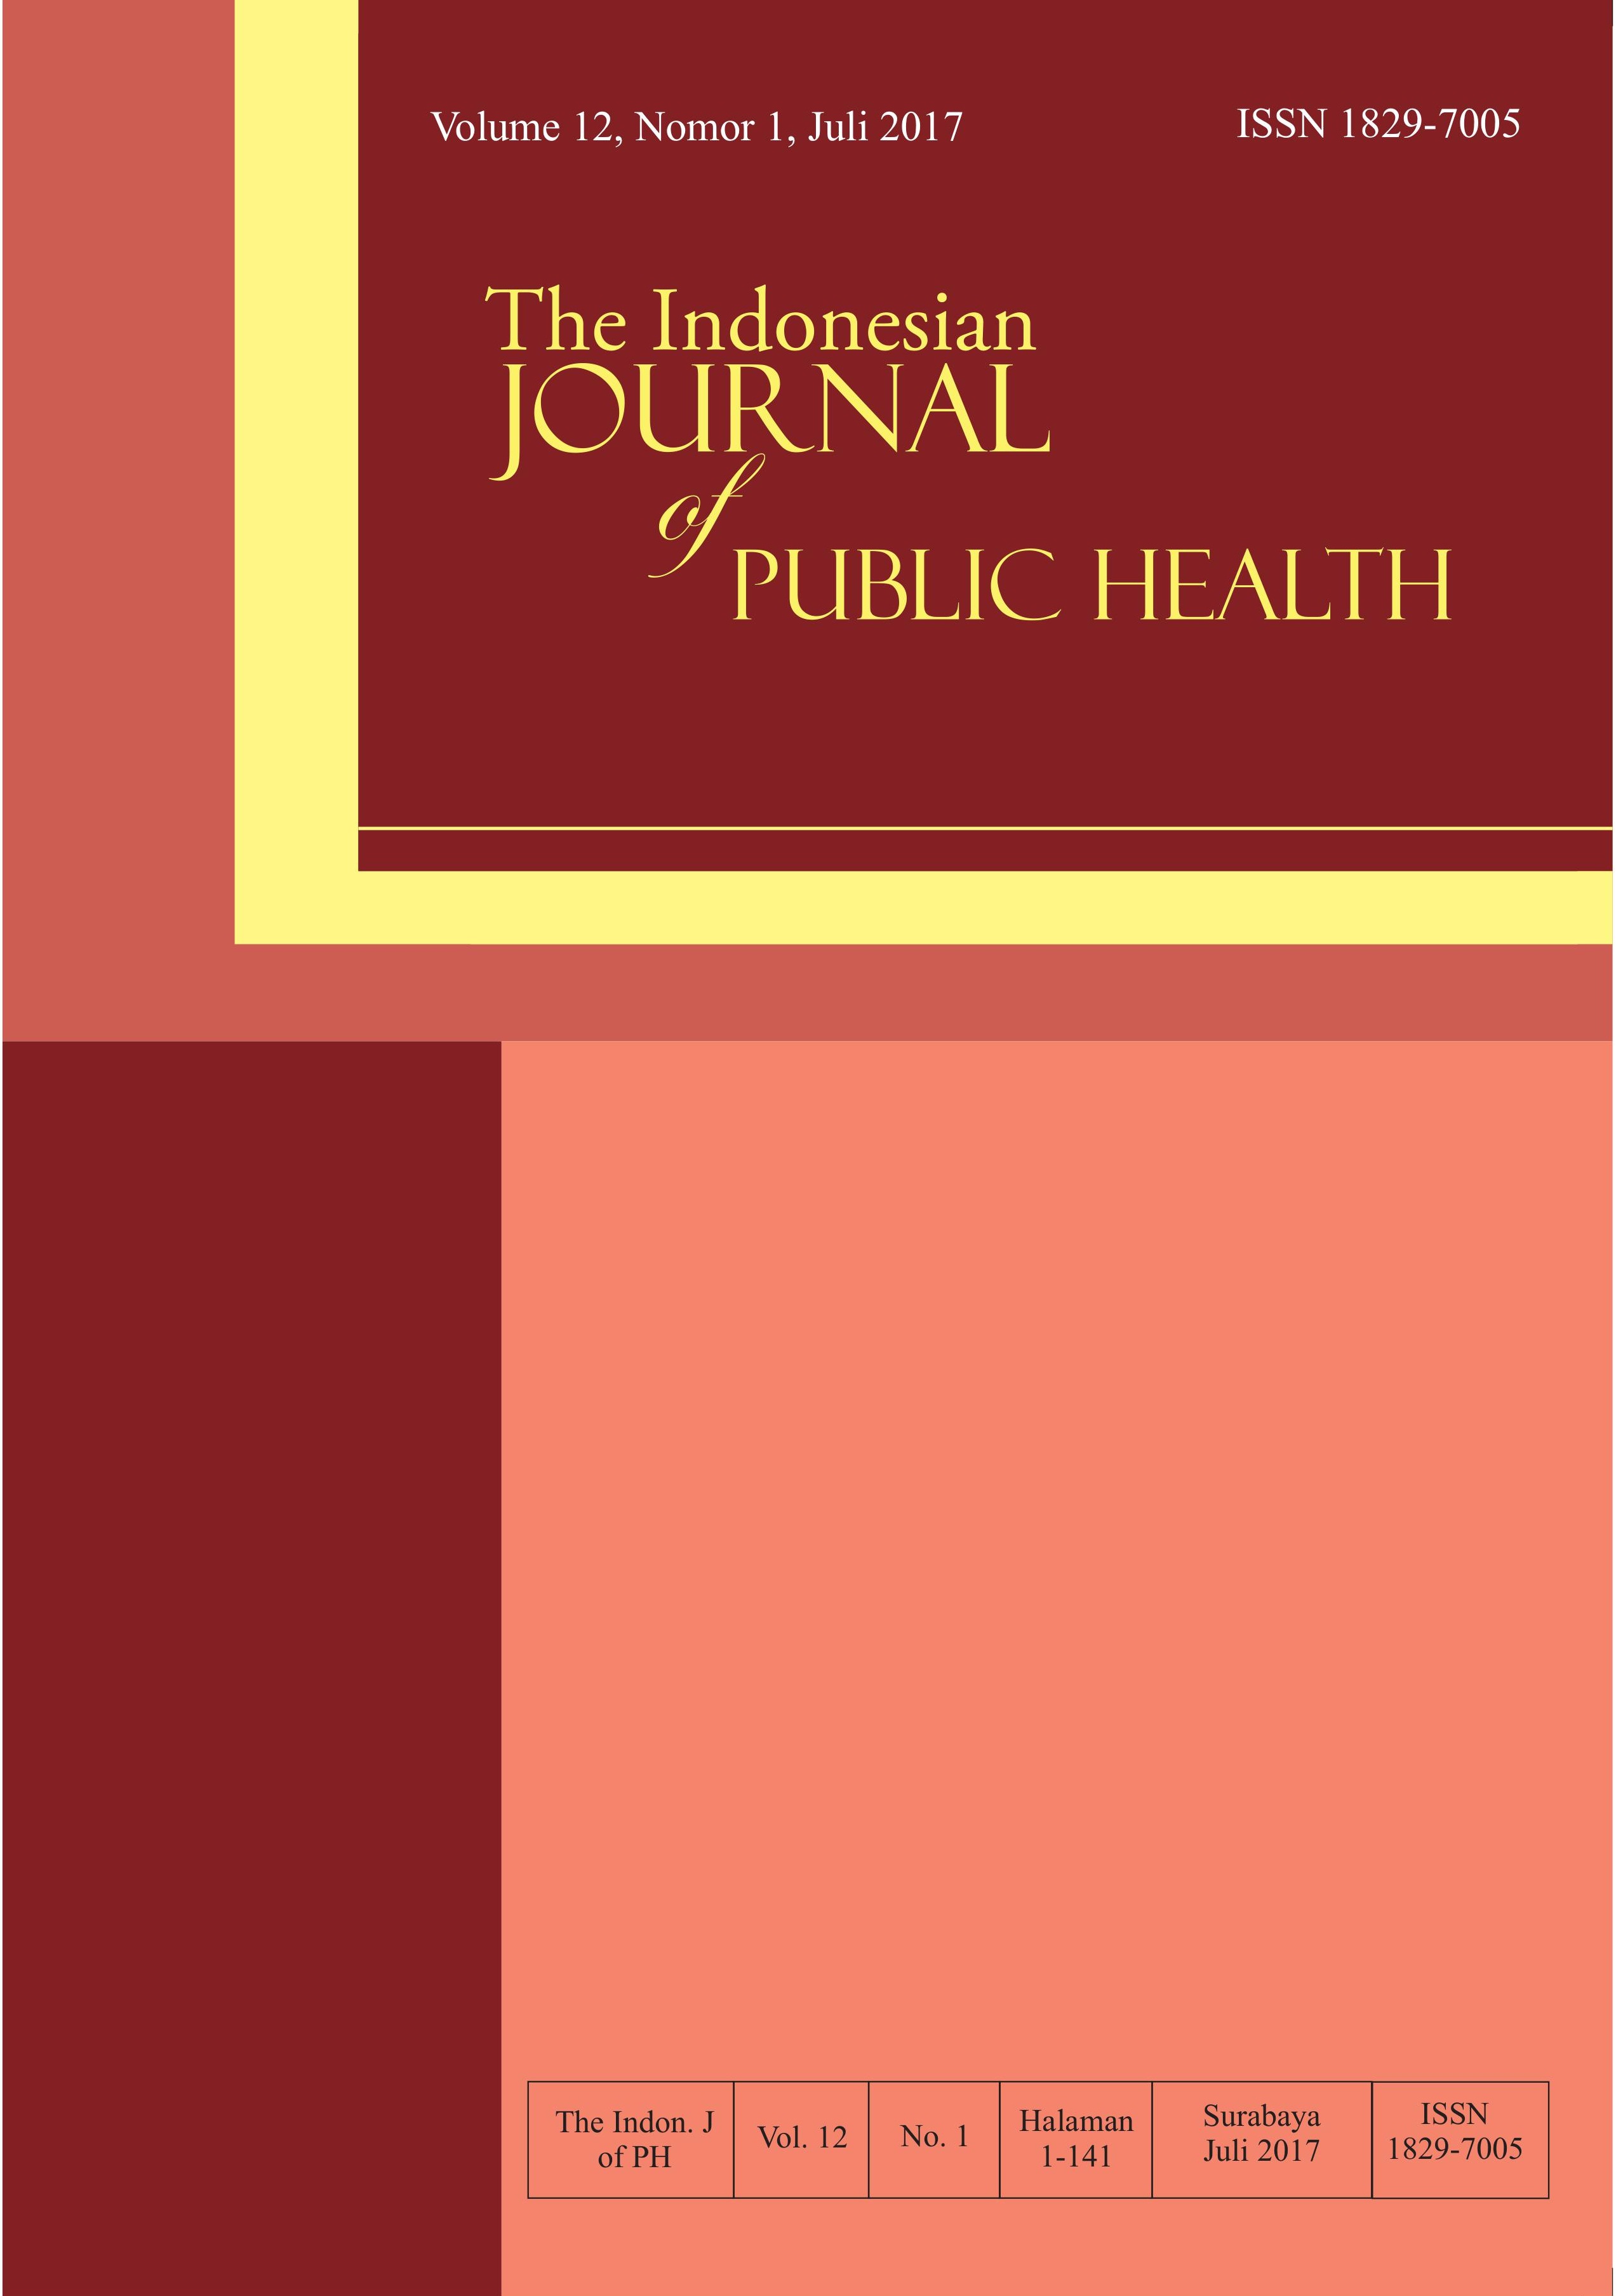 						View Vol. 12 No. 1 (2017): The Indonesian Journal Of Public Health
					